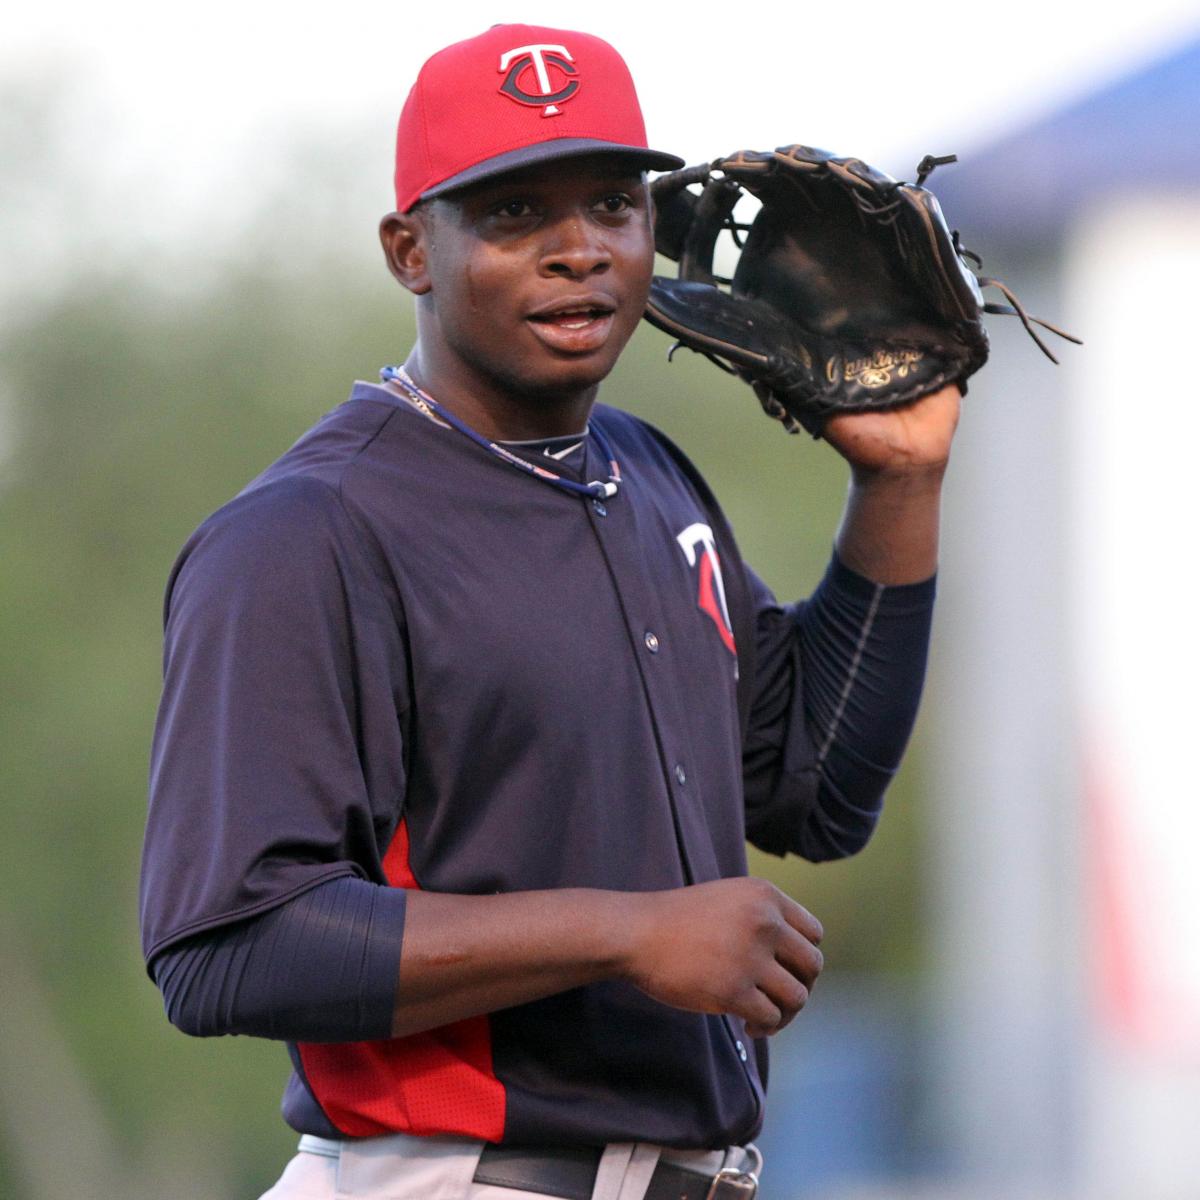 Miguel Sano Rookie Cards: Value, Tracking & Hot Deals